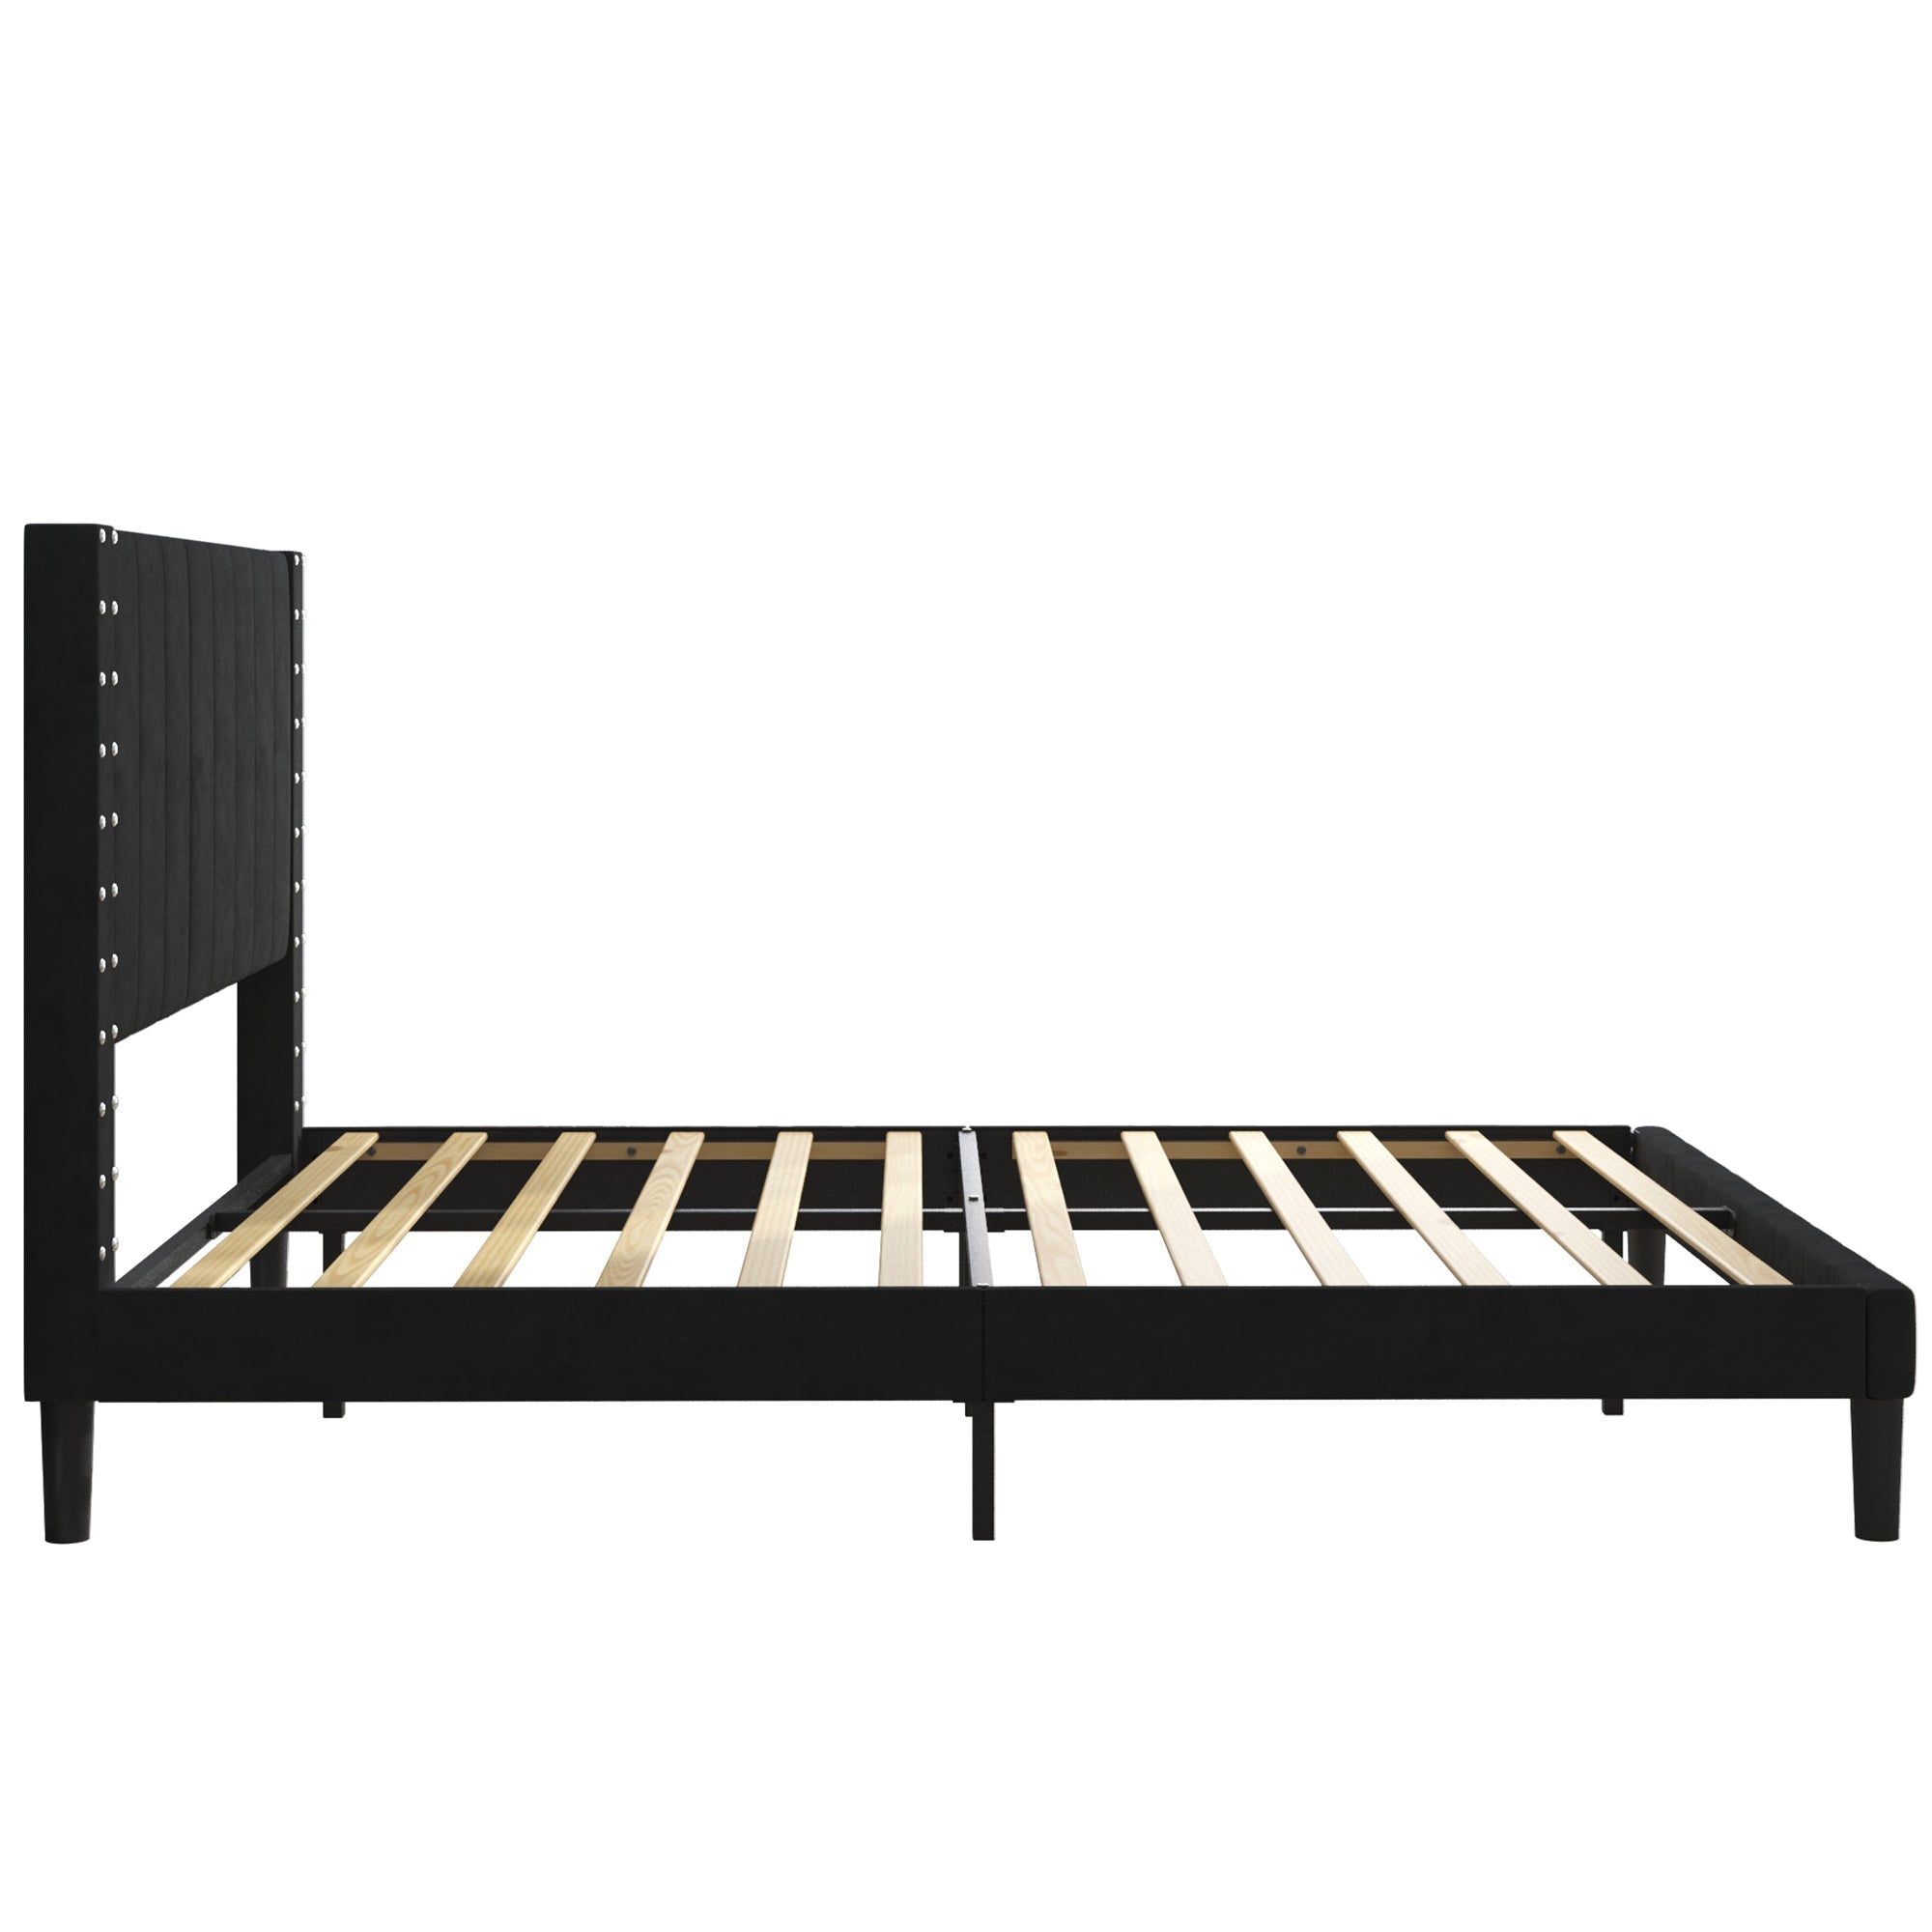 Black Queen Bed Frame for Adults Kids, Modern Fabric Upholstered Platform Bed Frame with Headboard, Queen Size Bed Frame Bedroom Furniture with Wood Slats Support, No Box Spring Needed